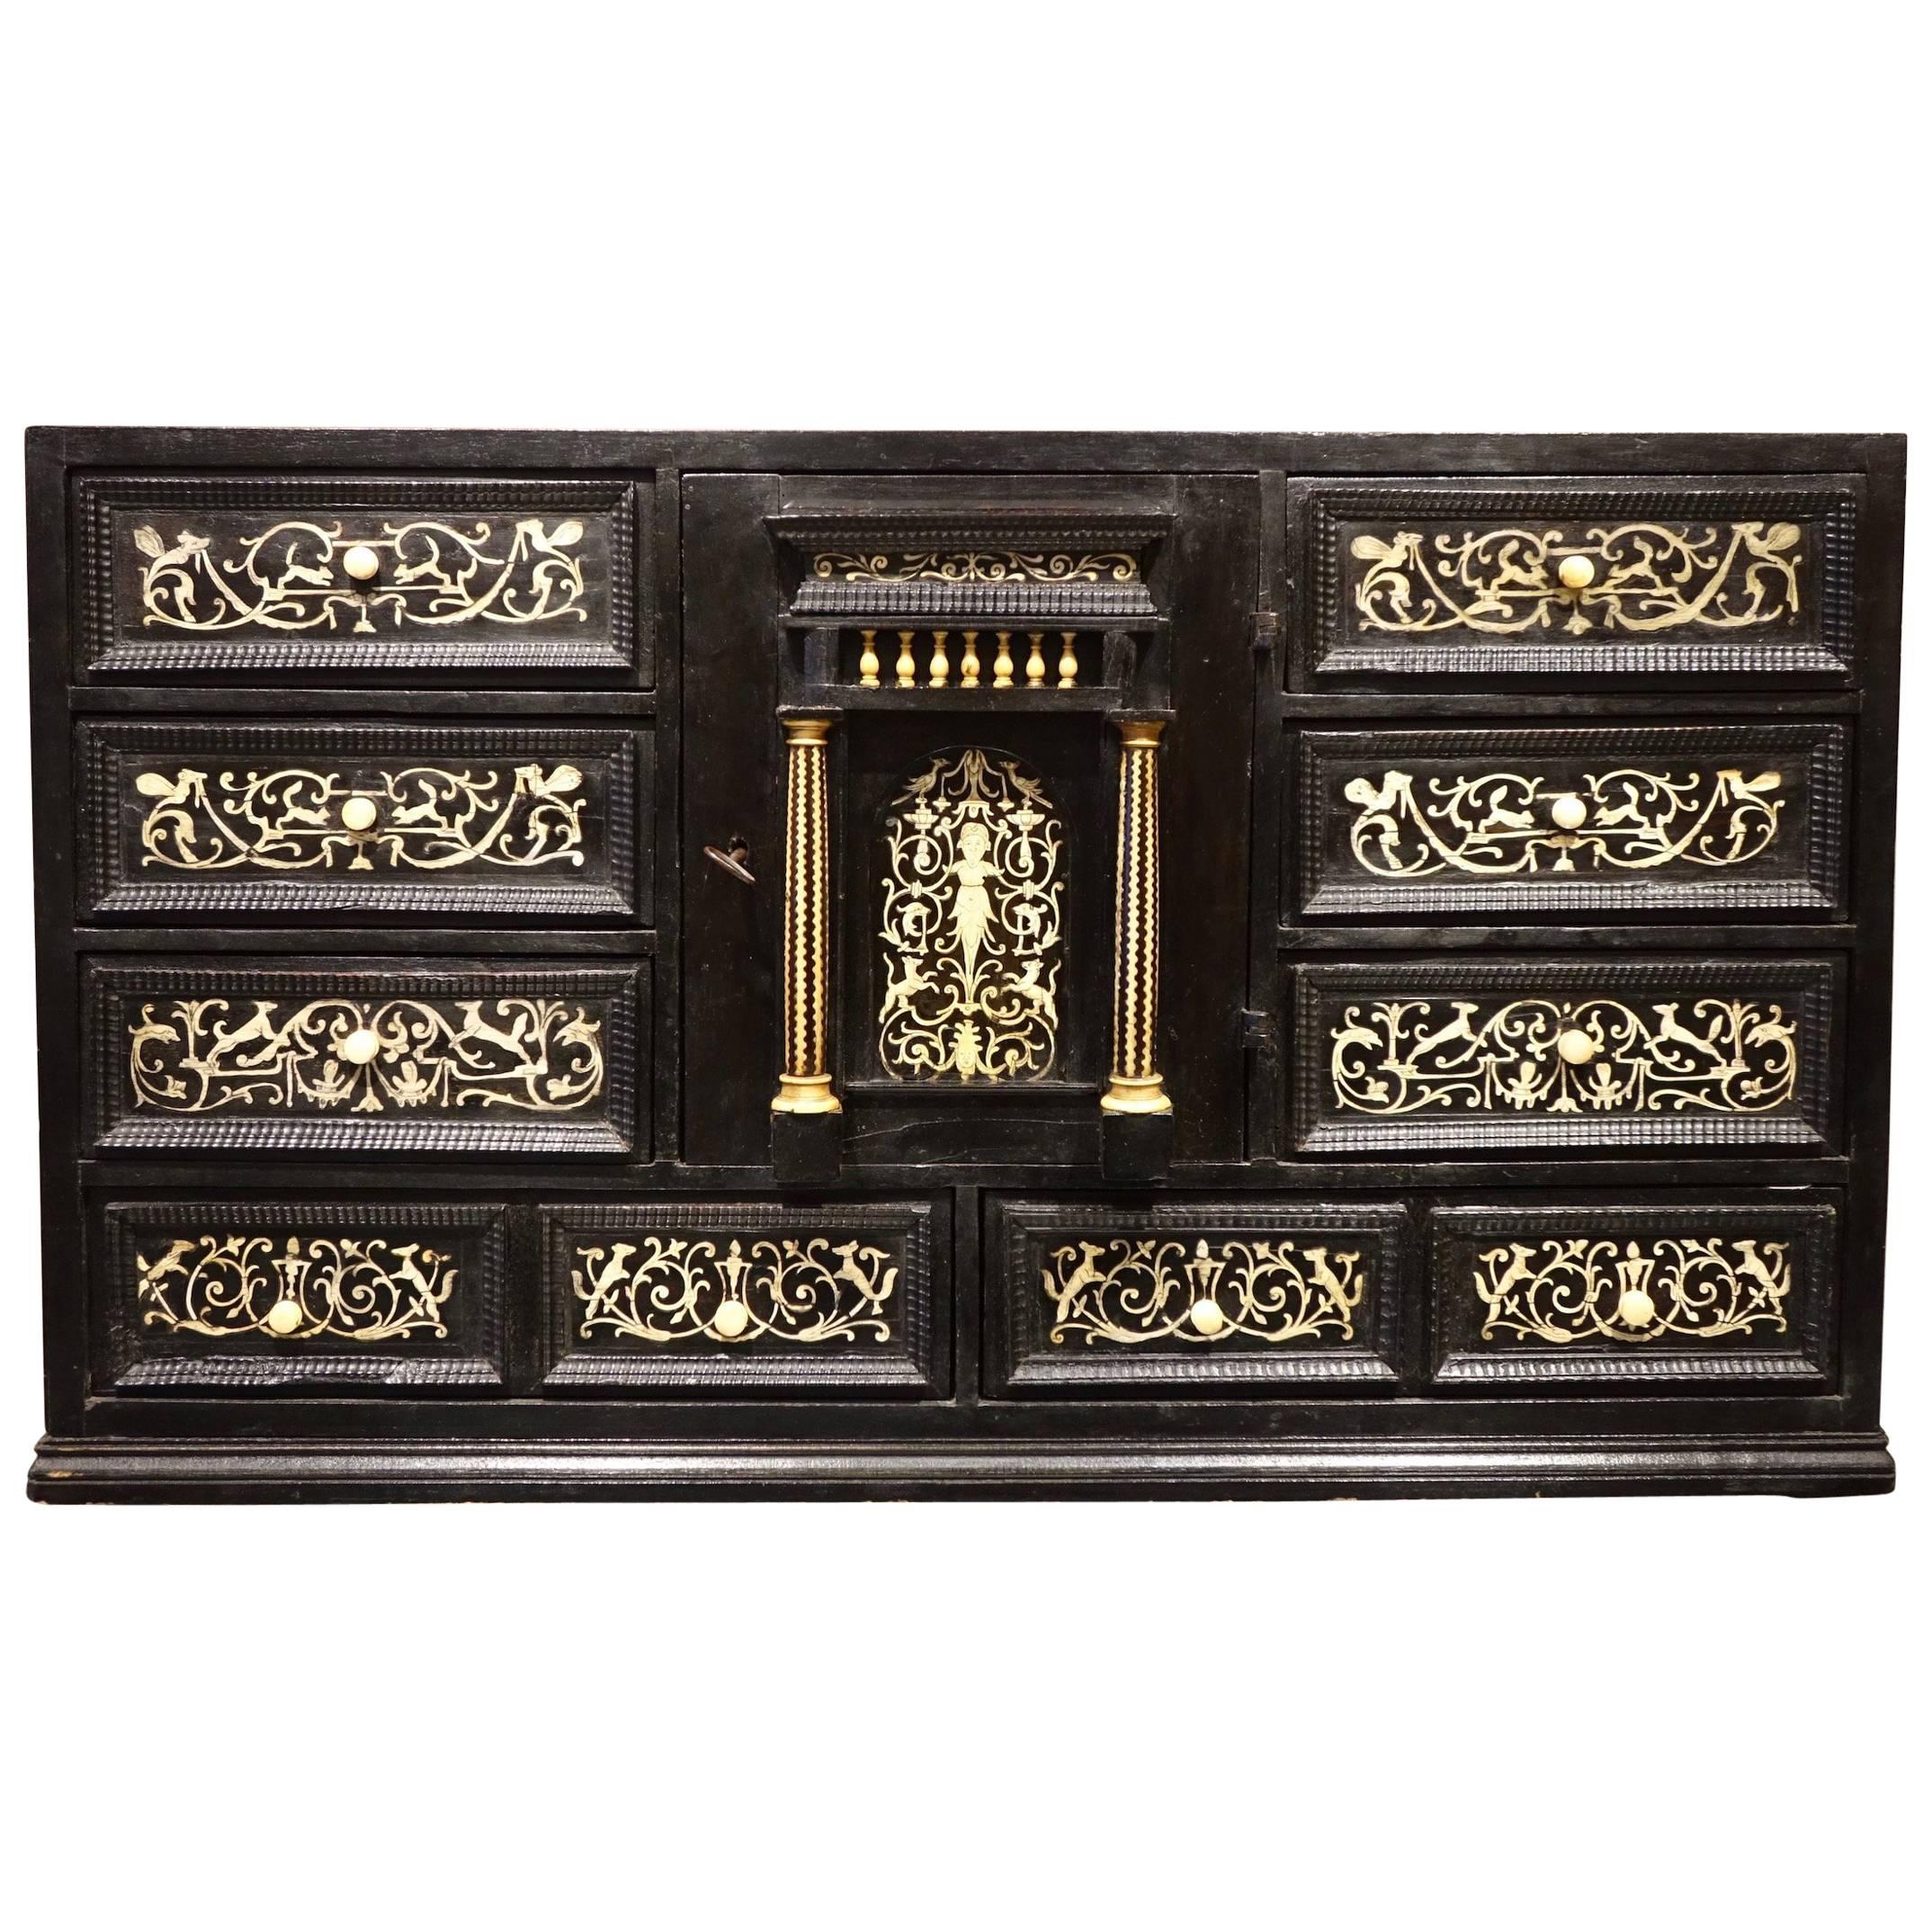 17th Century Ebonized Wood Cabinet with Inlay, Northern Italy